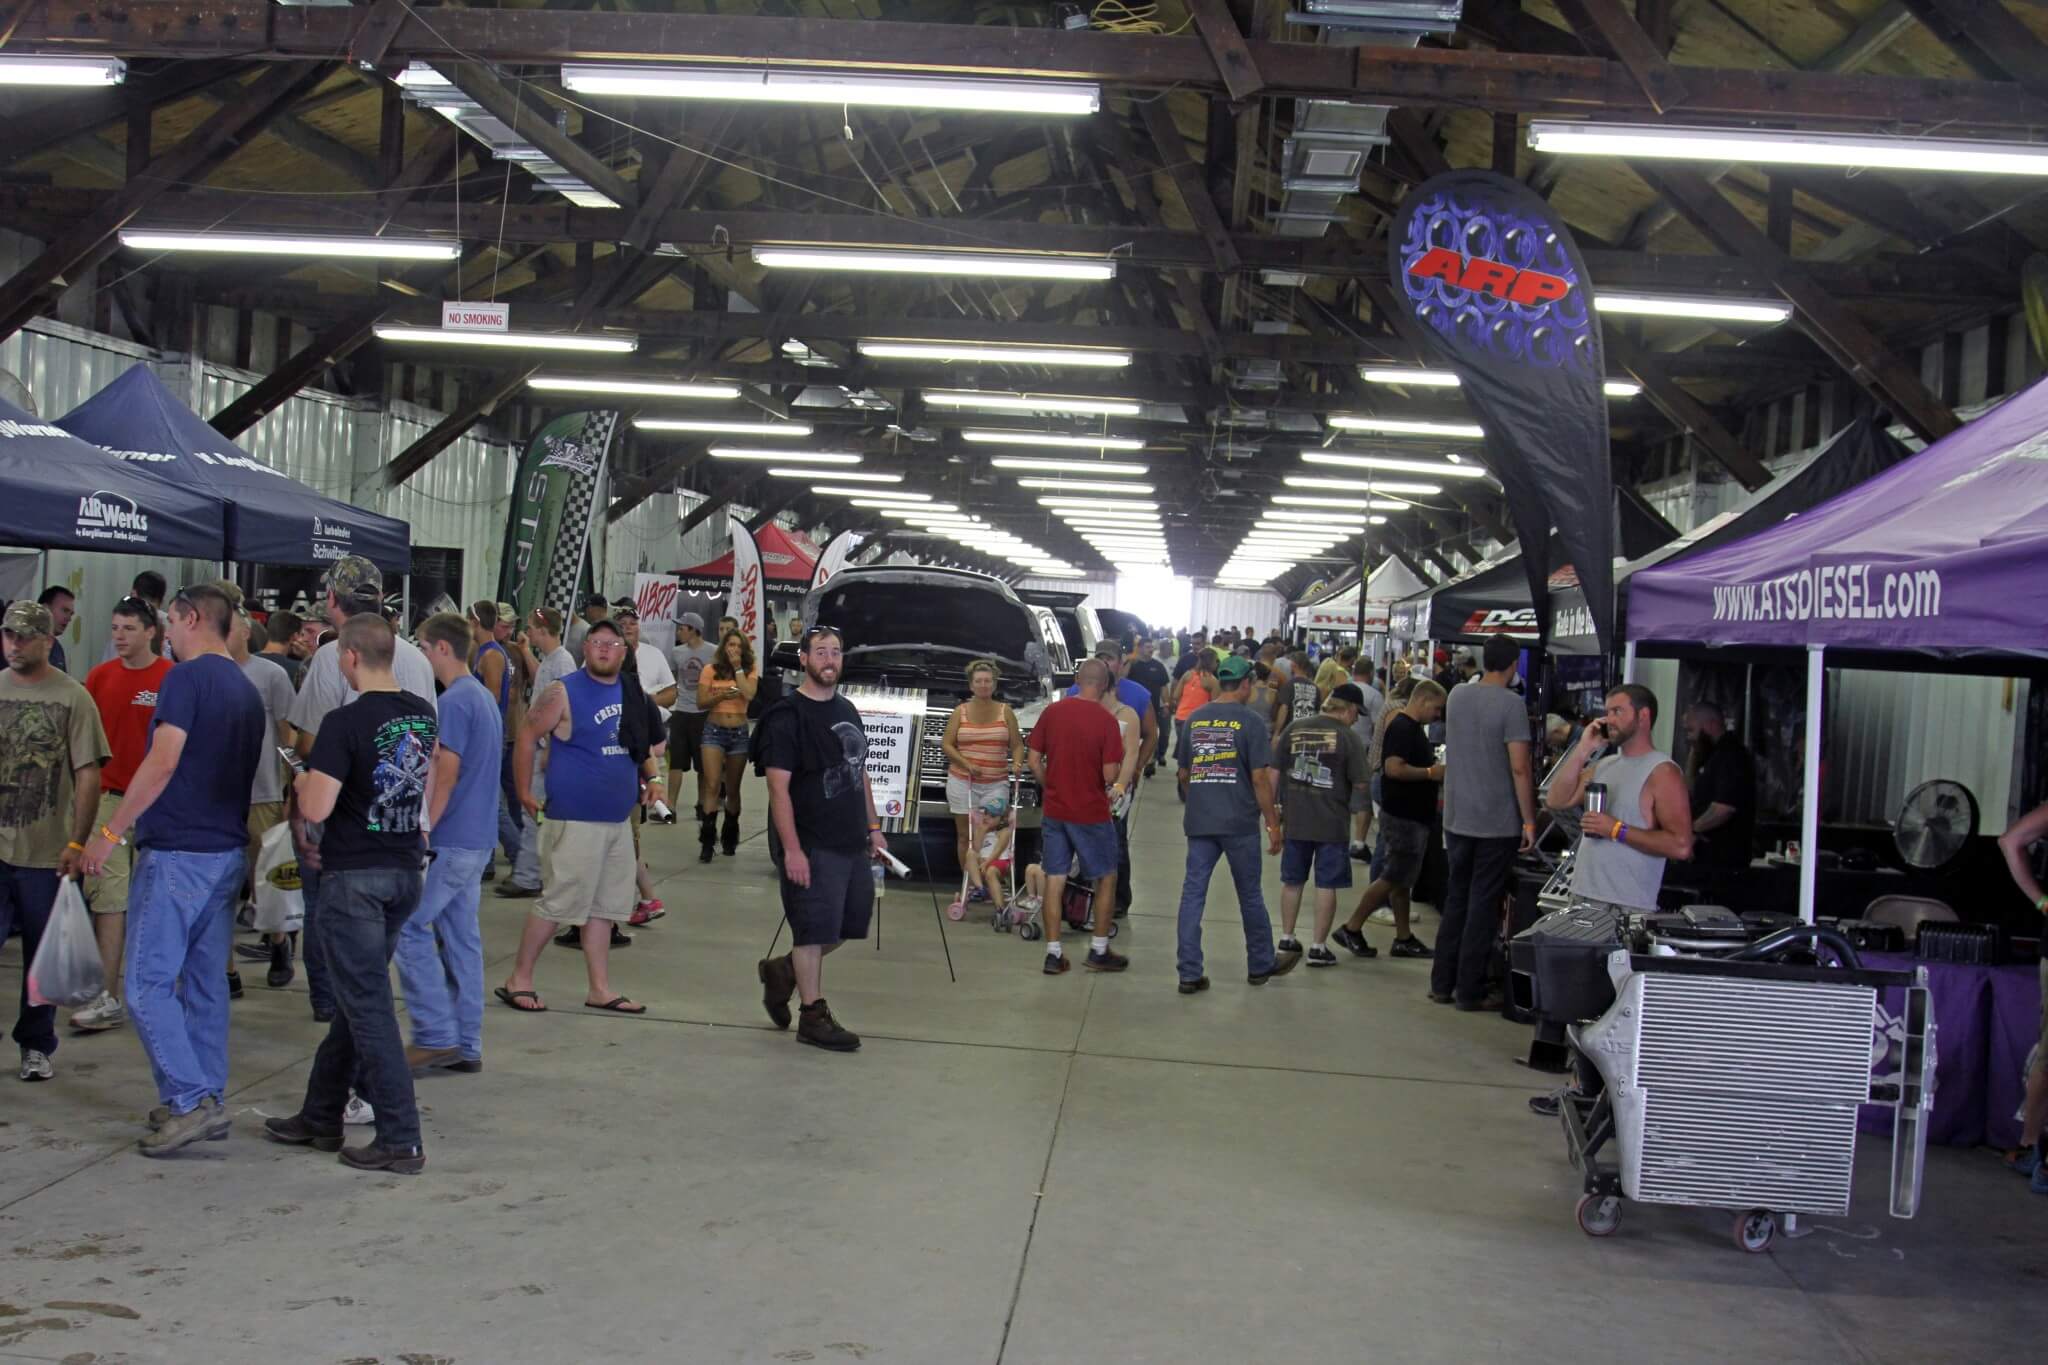 Spectators crowded the inside of the main pavilion throughout the Extravaganza checking out the latest products from some of the top manufacturers in the performance diesel industry.